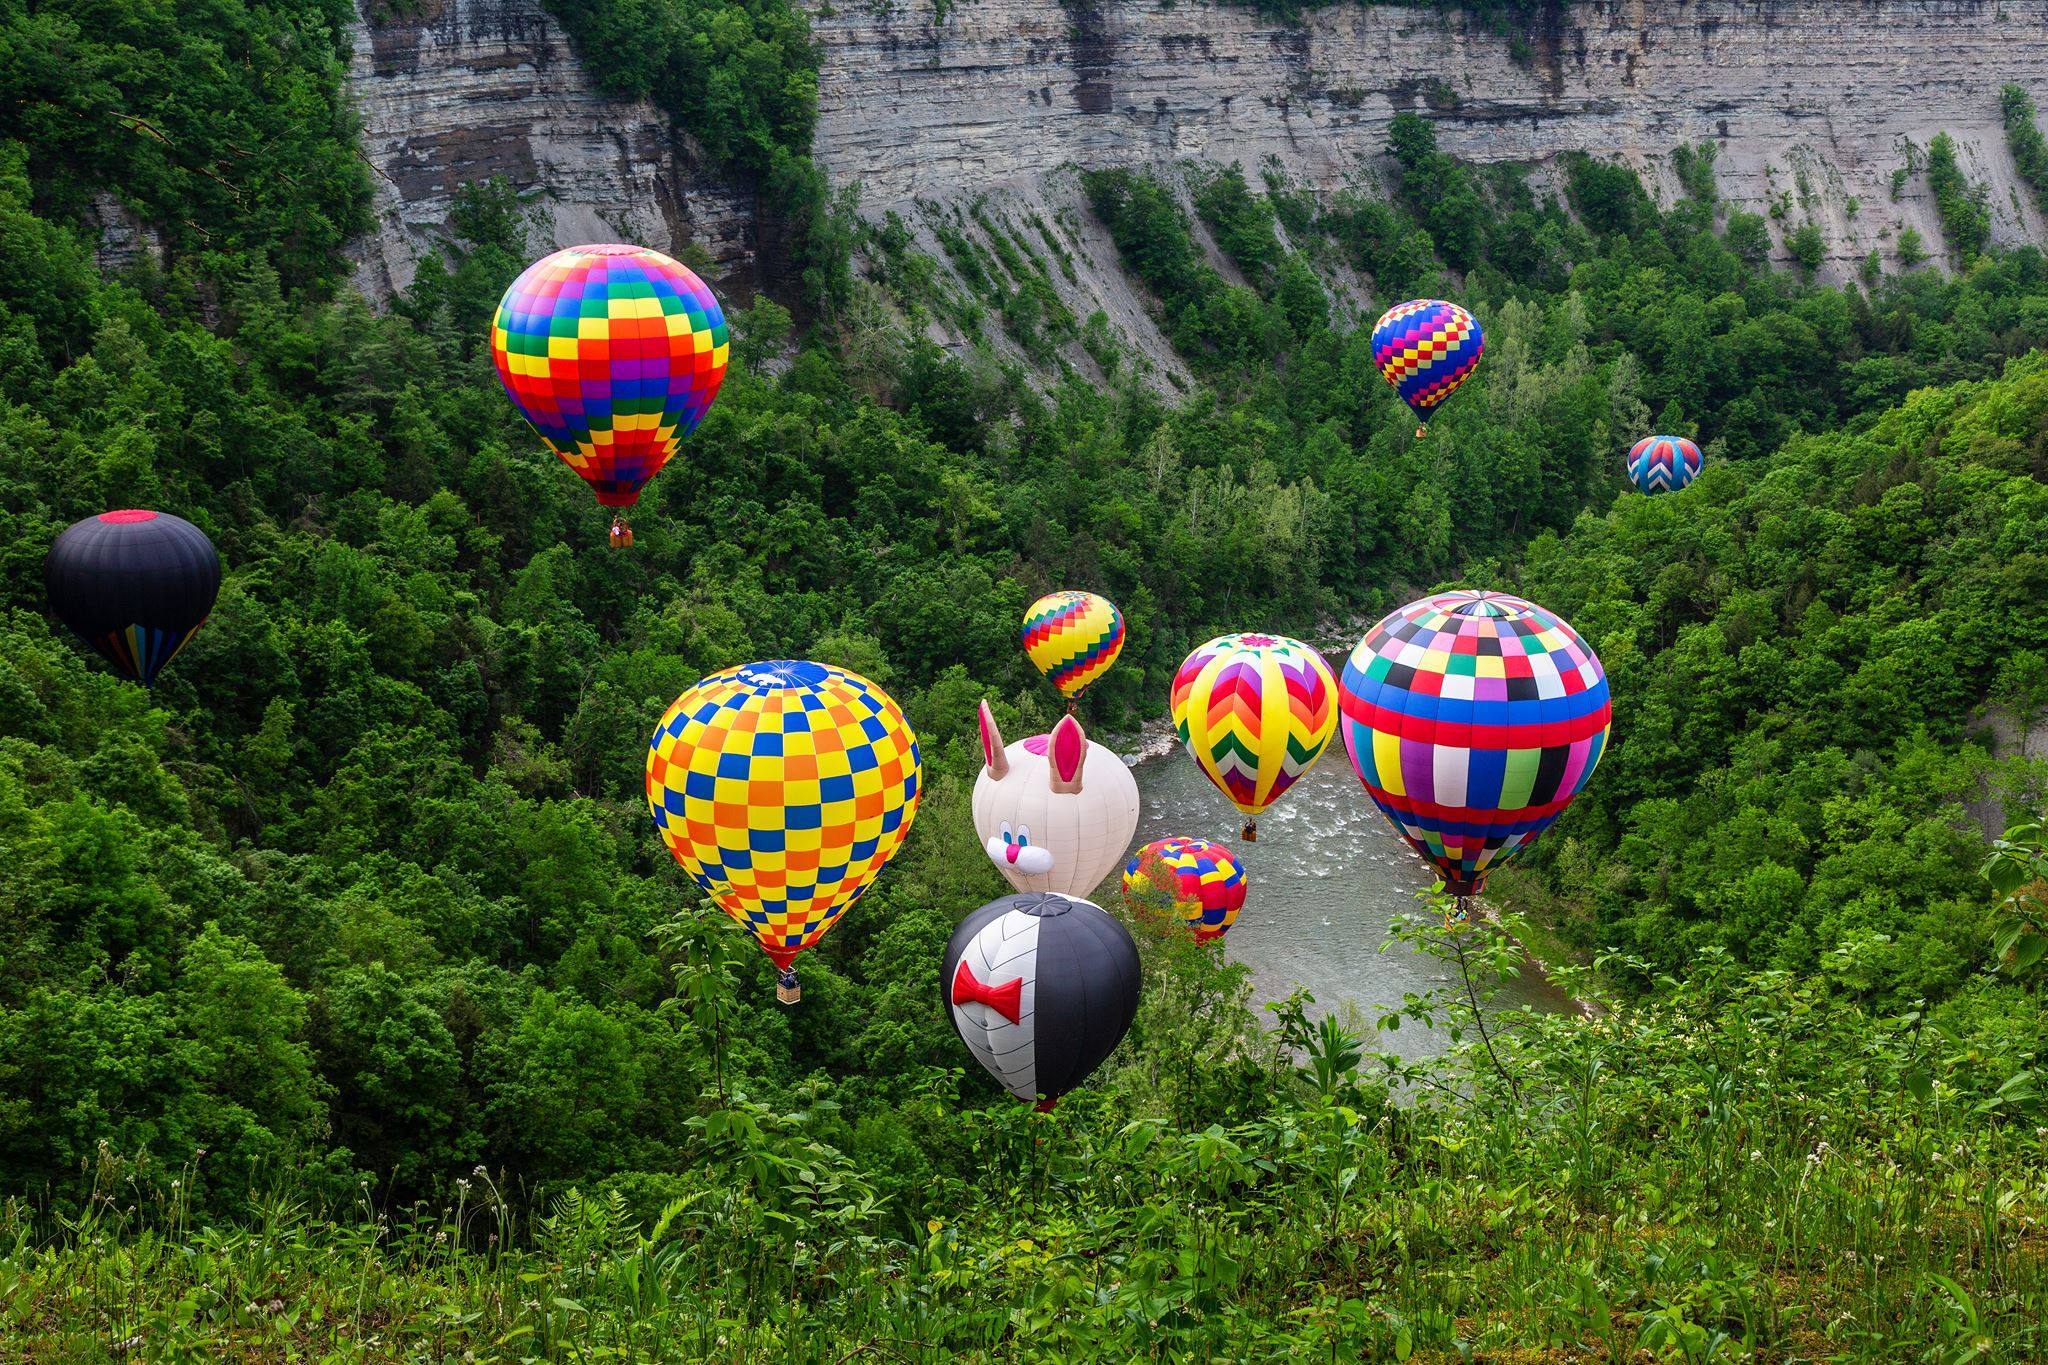 Balloons flying in the Letchworth Gorge